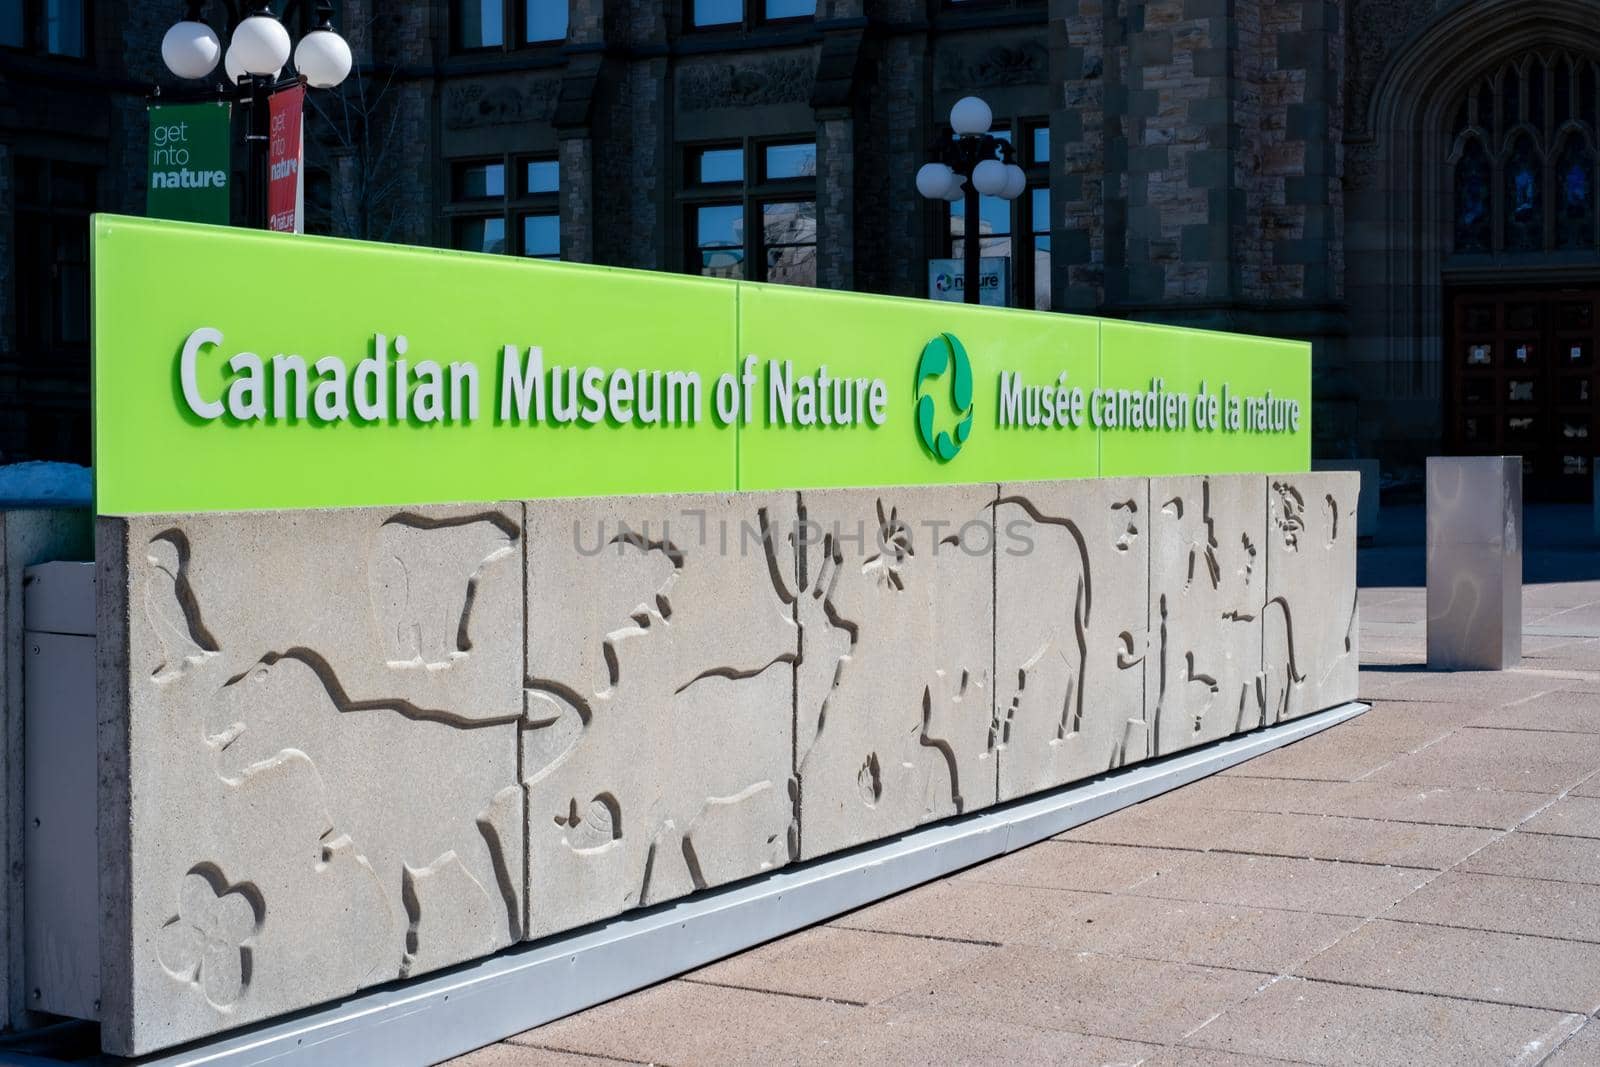 Canadian Museum of Nature entrance sign by colintemple